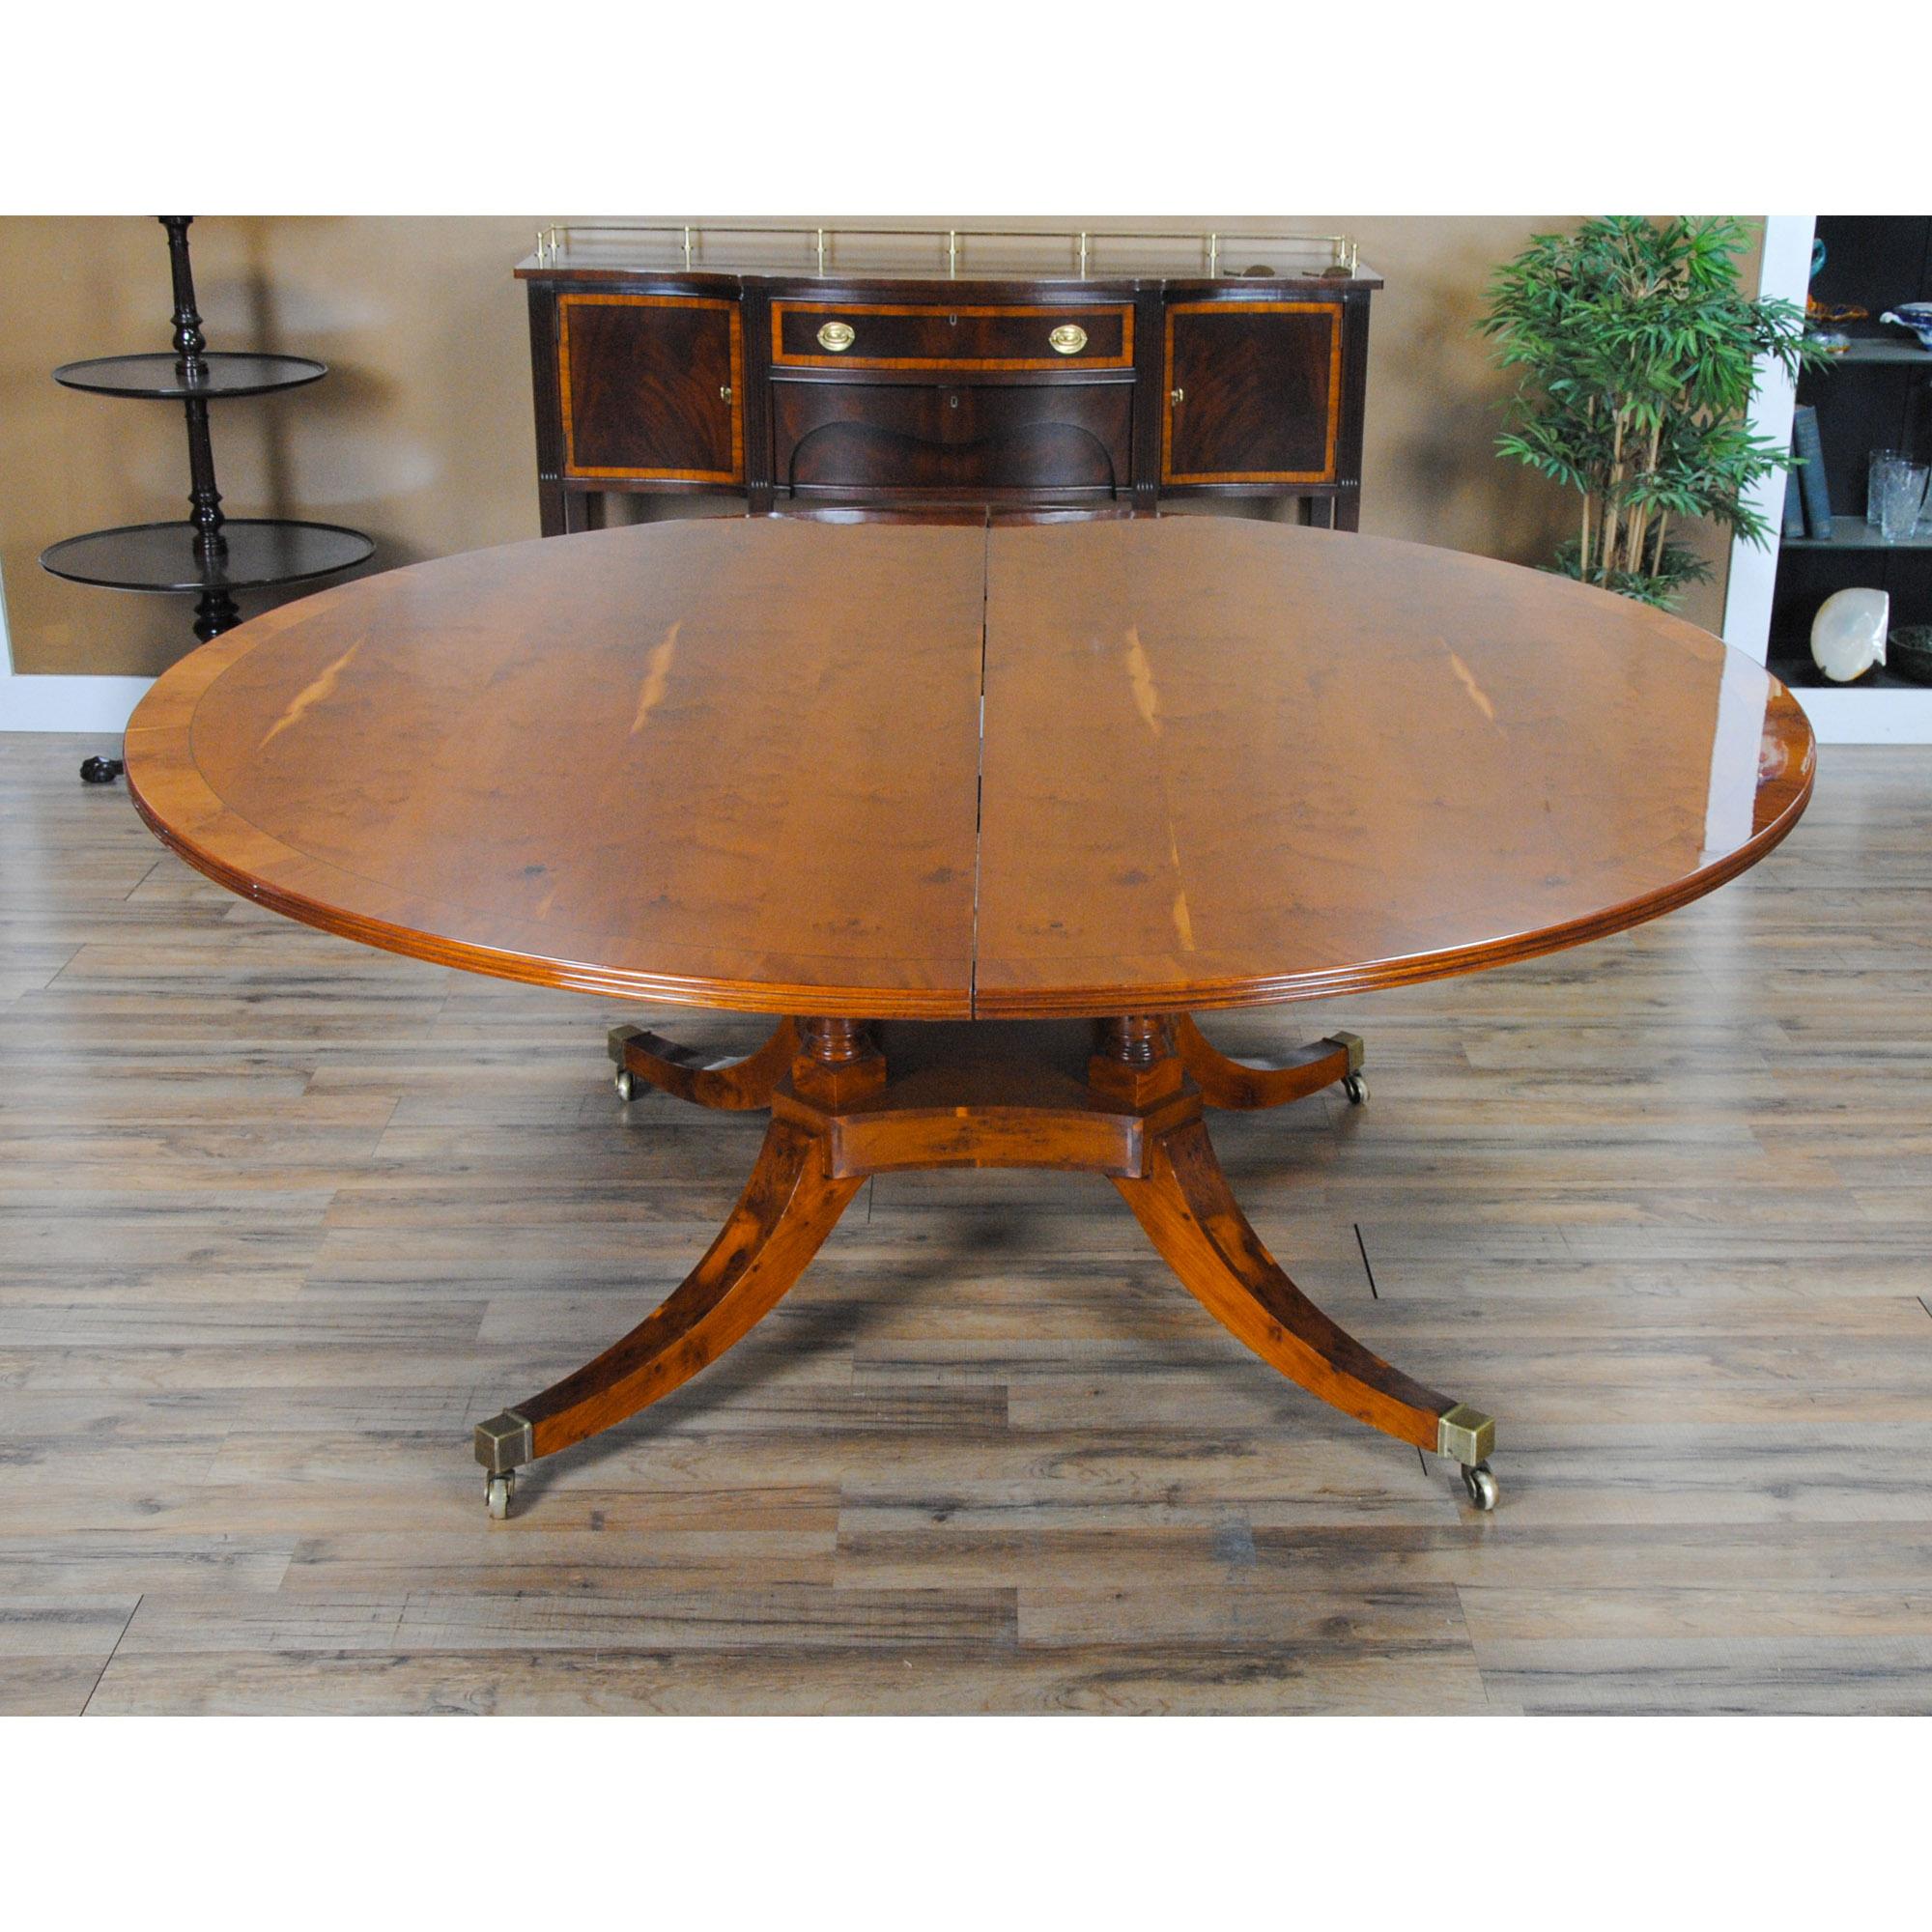 Vintage English Round to Oval Dining Table In Good Condition For Sale In Annville, PA